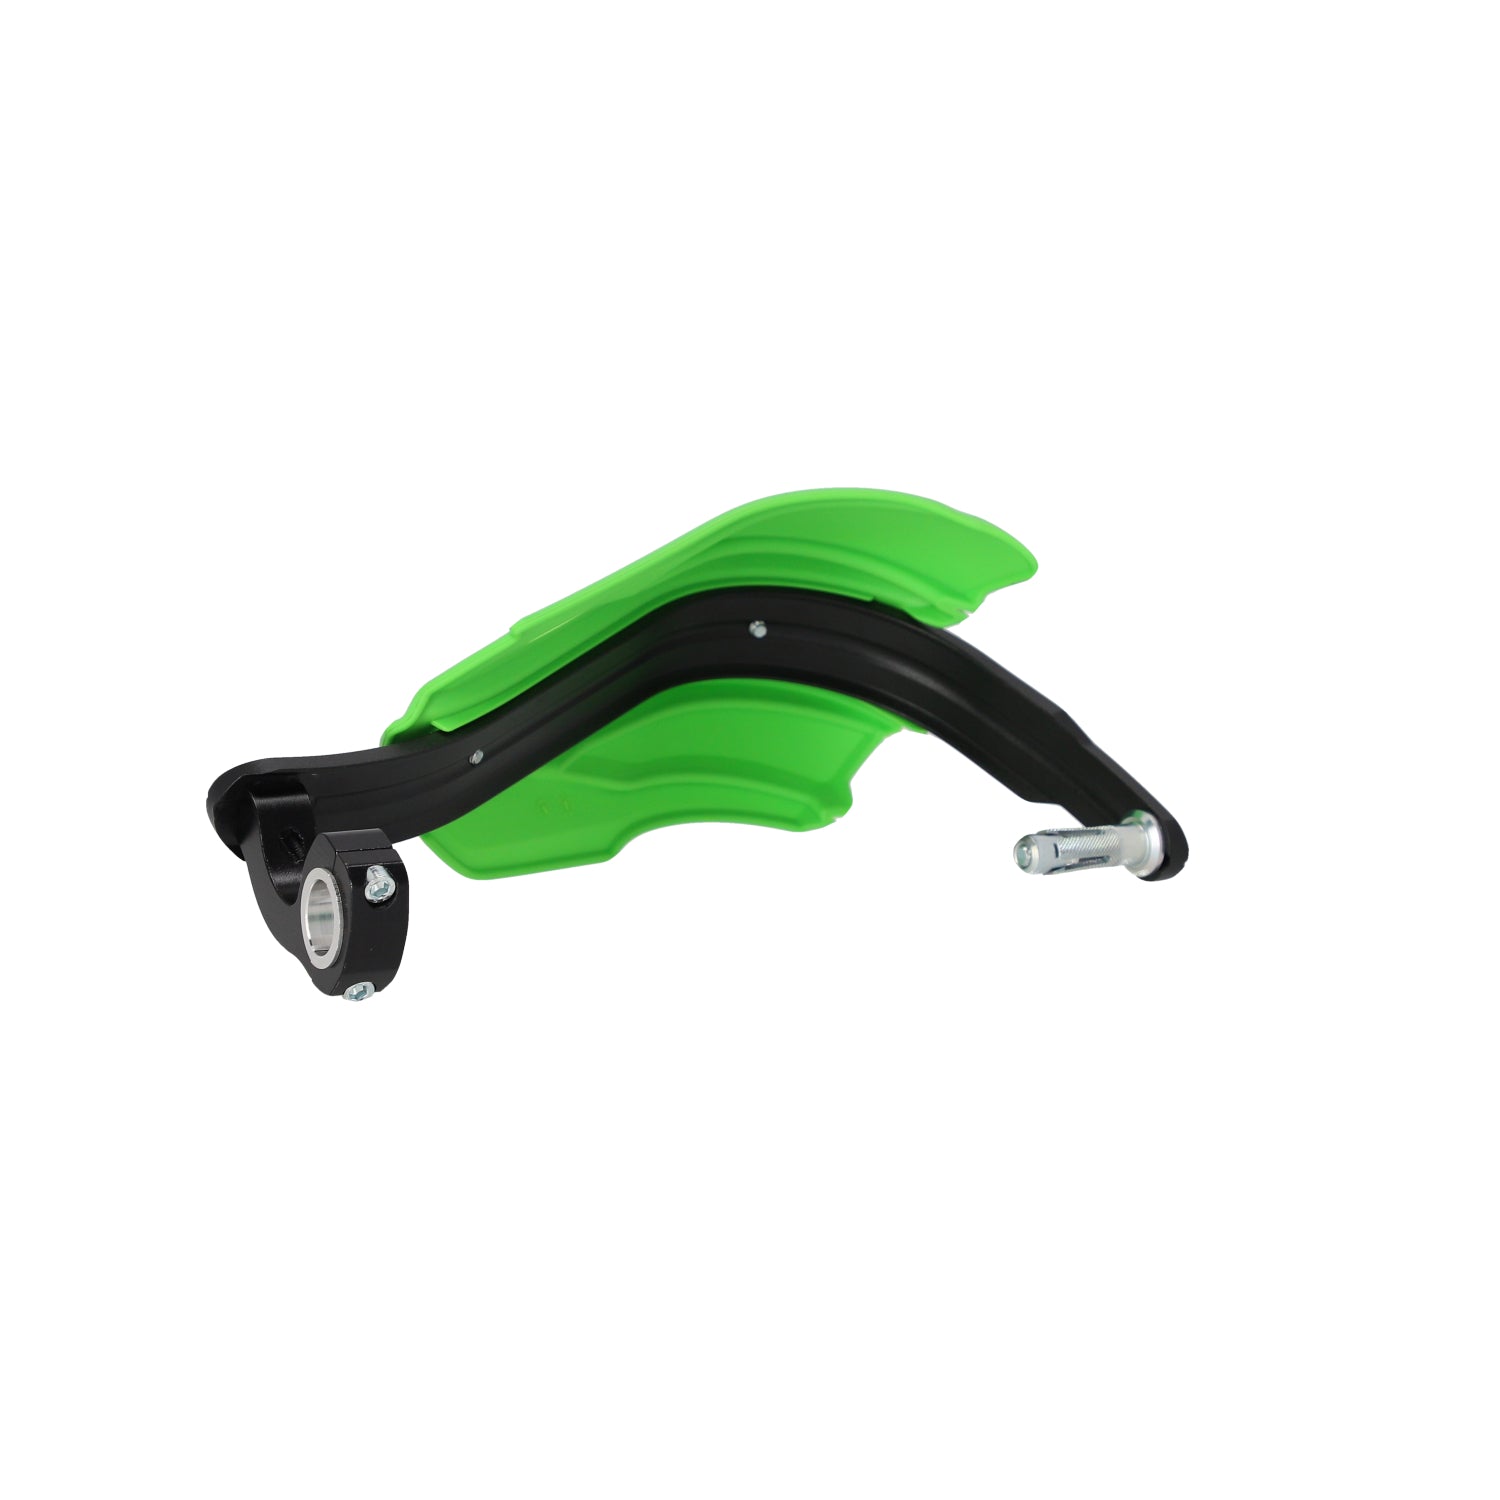 Acerbis Endurance-X Handguards complete with fitting kit Green/Black